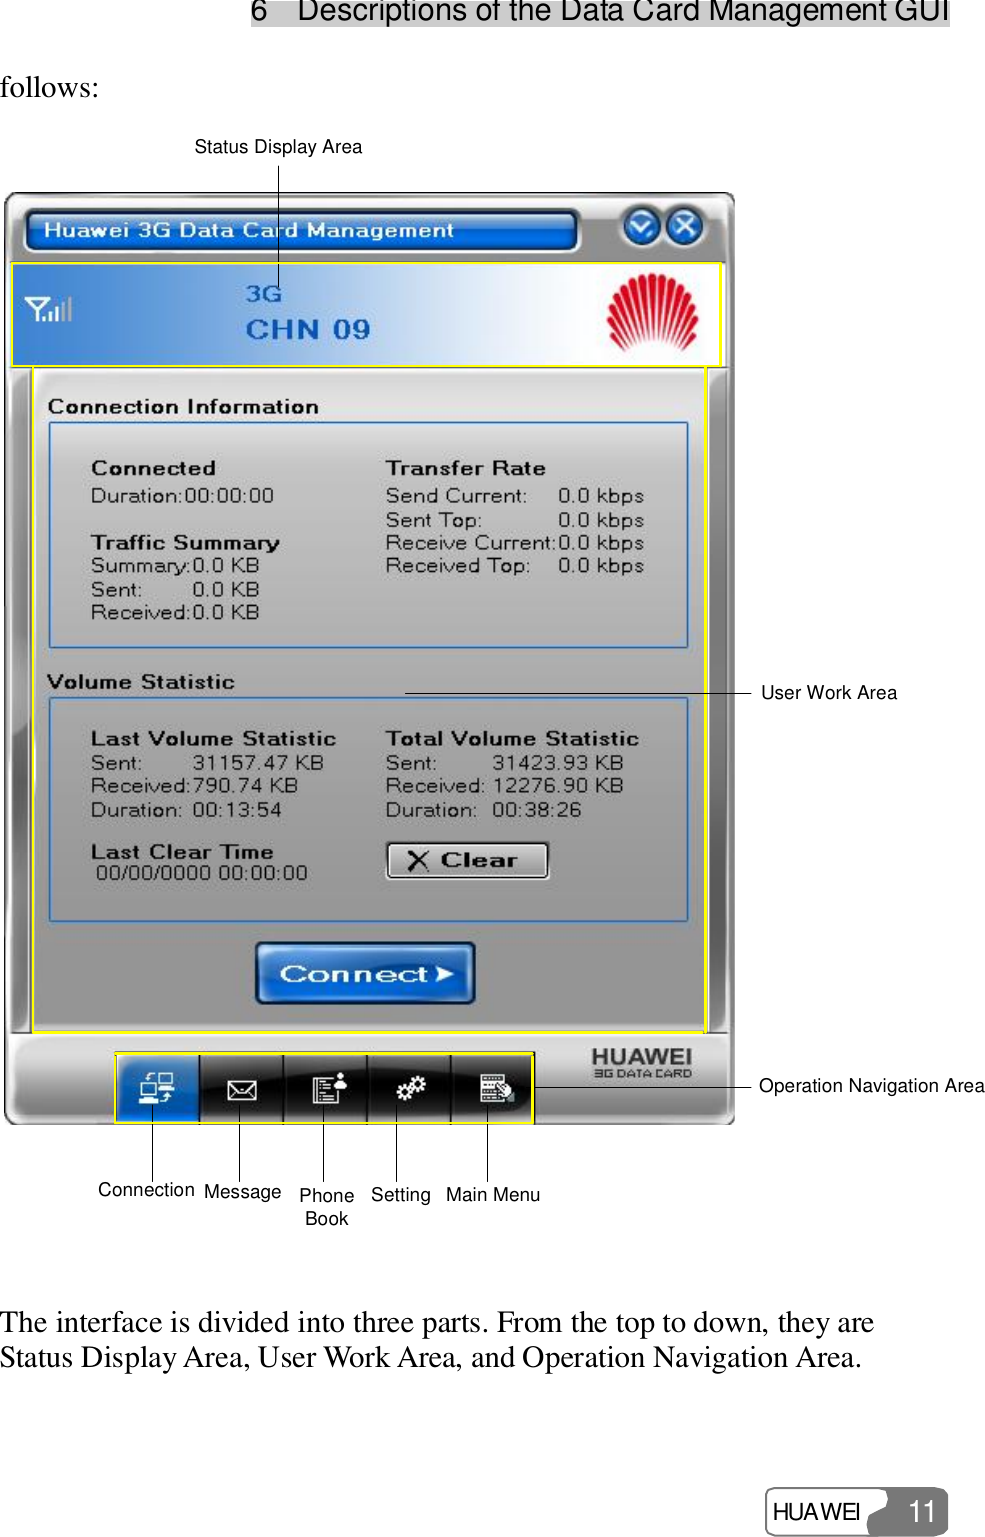 6  Descriptions of the Data Card Management GUI HUAWEI  11 follows: Connection PhoneBookMessage SettingMain MenuOperation Navigation AreaStatus Display AreaUser Work Area  The interface is divided into three parts. From the top to down, they are Status Display Area, User Work Area, and Operation Navigation Area. 